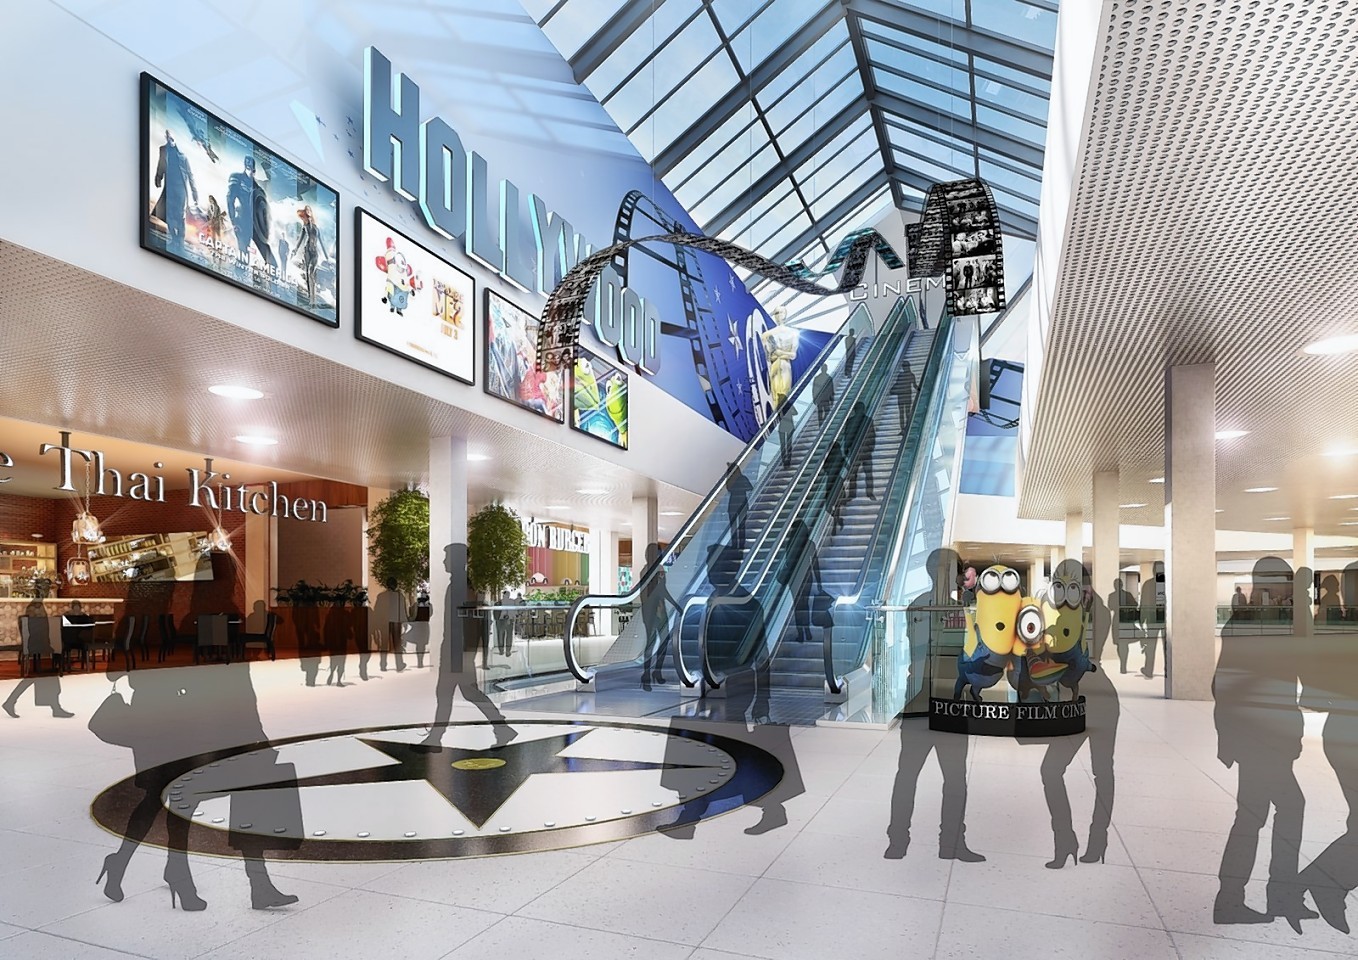 Artist impressions of the expansion plans